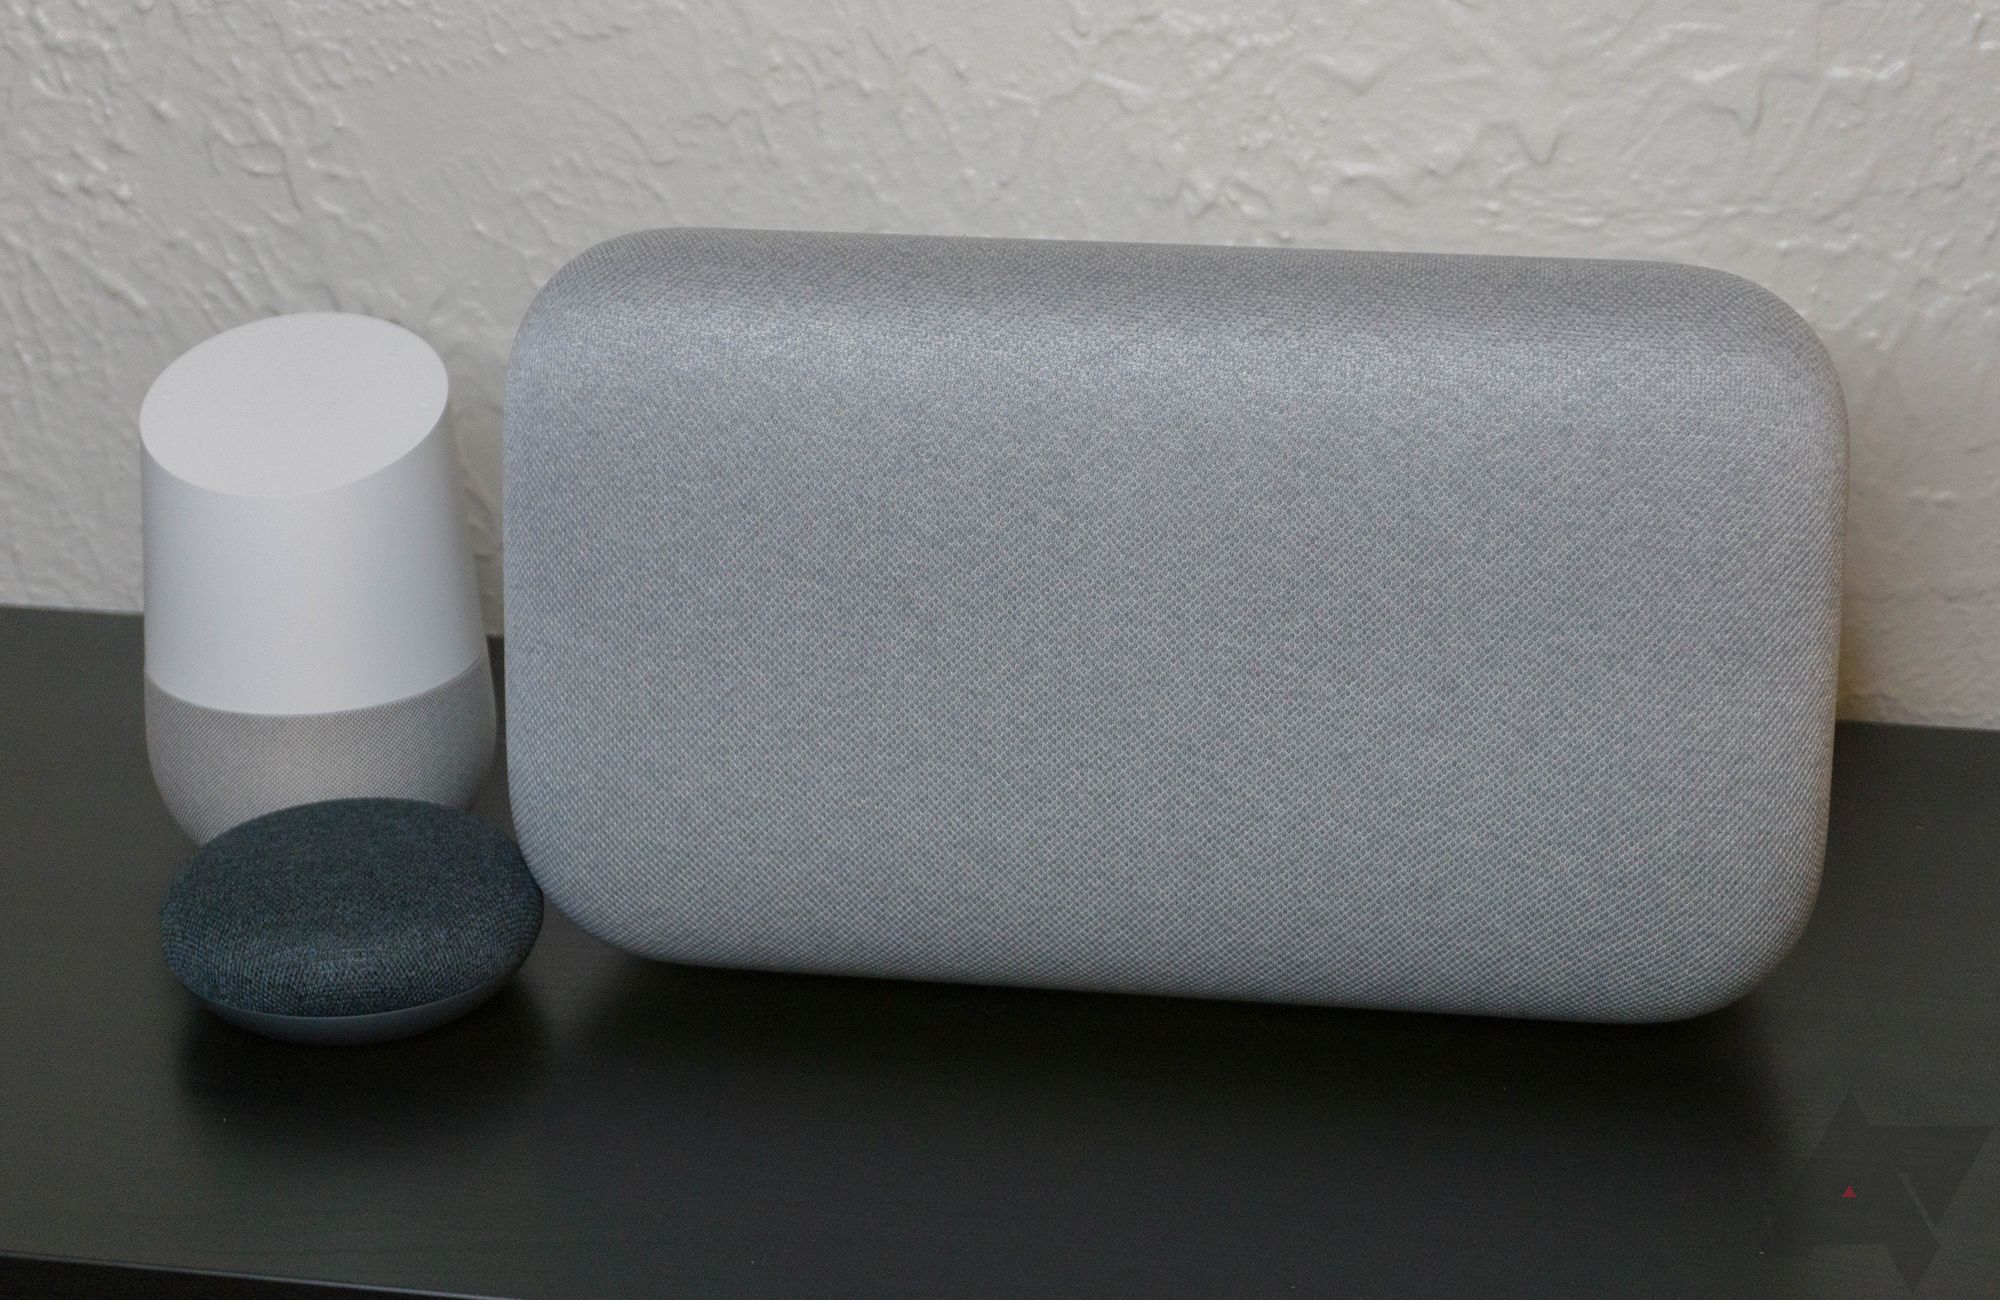 Google discontinues Home Max speaker, tells you to buy two Nest Audios instead